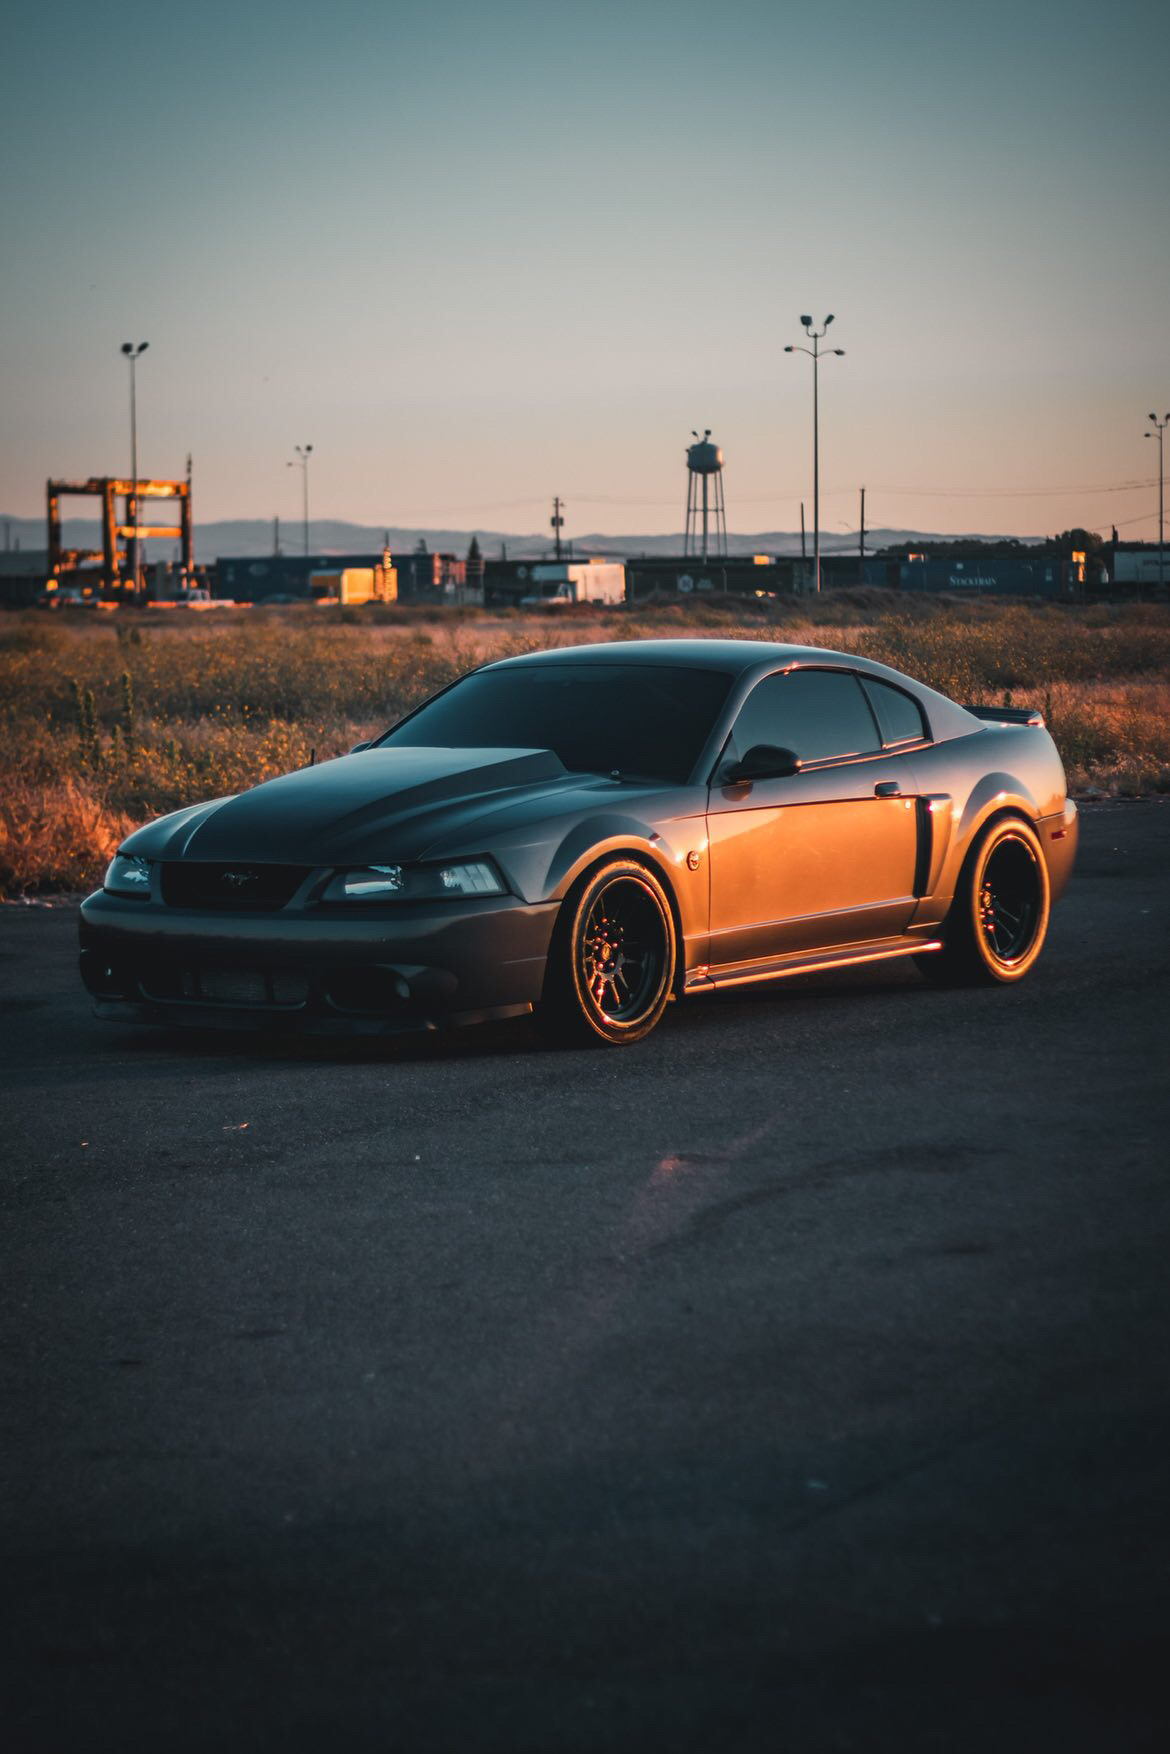 2004 Ford Mustang Mach 1 with a cowl hood and a supercharger